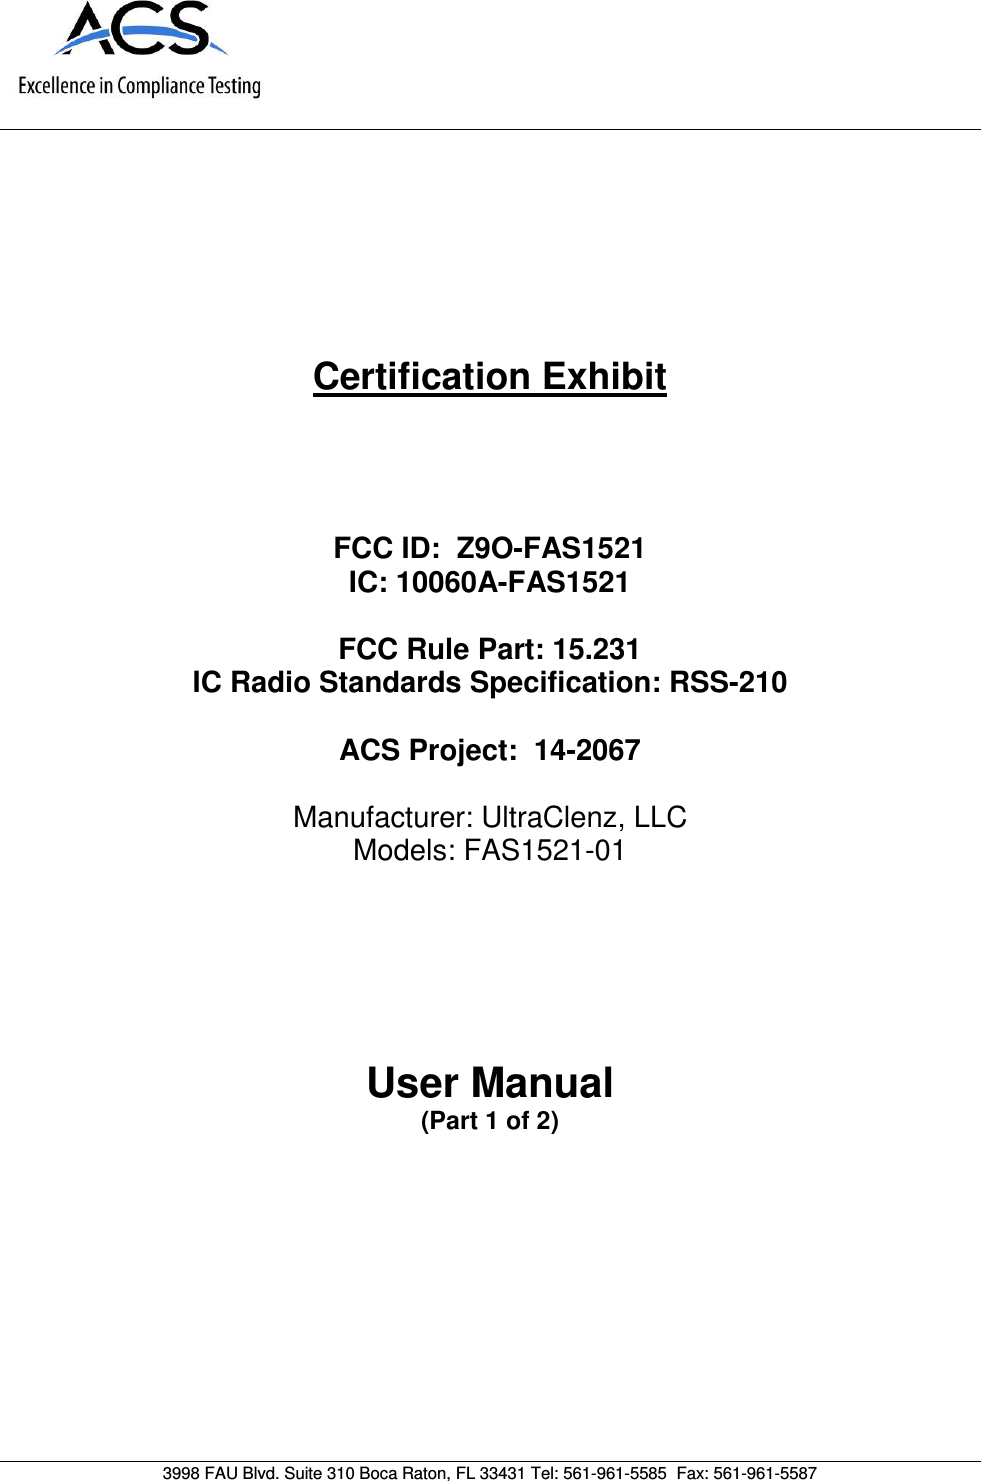      Certification Exhibit     FCC ID:  Z9O-FAS1521 IC: 10060A-FAS1521  FCC Rule Part: 15.231 IC Radio Standards Specification: RSS-210  ACS Project:  14-2067   Manufacturer: UltraClenz, LLC Models: FAS1521-01     User Manual (Part 1 of 2)   3998 FAU Blvd. Suite 310 Boca Raton, FL 33431 Tel: 561-961-5585  Fax: 561-961-5587 